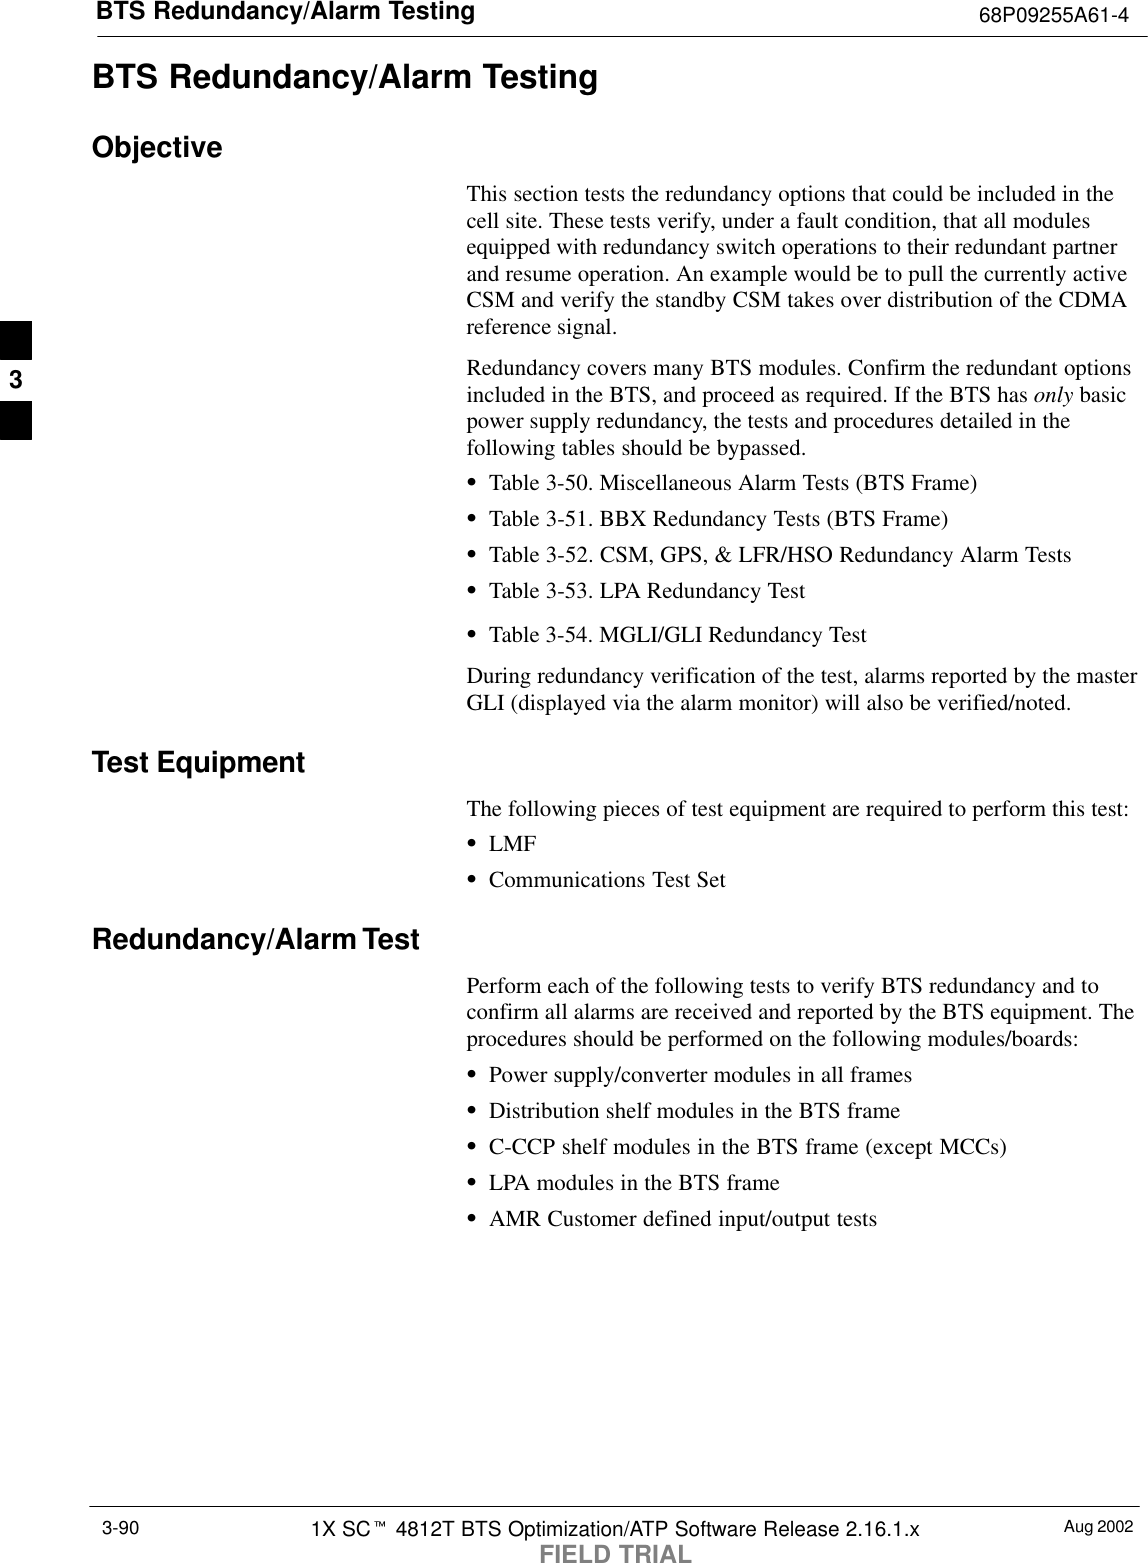 BTS Redundancy/Alarm Testing 68P09255A61-4Aug 20021X SCt 4812T BTS Optimization/ATP Software Release 2.16.1.xFIELD TRIAL3-90BTS Redundancy/Alarm TestingObjectiveThis section tests the redundancy options that could be included in thecell site. These tests verify, under a fault condition, that all modulesequipped with redundancy switch operations to their redundant partnerand resume operation. An example would be to pull the currently activeCSM and verify the standby CSM takes over distribution of the CDMAreference signal.Redundancy covers many BTS modules. Confirm the redundant optionsincluded in the BTS, and proceed as required. If the BTS has only basicpower supply redundancy, the tests and procedures detailed in thefollowing tables should be bypassed.STable 3-50. Miscellaneous Alarm Tests (BTS Frame)STable 3-51. BBX Redundancy Tests (BTS Frame)STable 3-52. CSM, GPS, &amp; LFR/HSO Redundancy Alarm TestsSTable 3-53. LPA Redundancy TestSTable 3-54. MGLI/GLI Redundancy TestDuring redundancy verification of the test, alarms reported by the masterGLI (displayed via the alarm monitor) will also be verified/noted.Test EquipmentThe following pieces of test equipment are required to perform this test:SLMFSCommunications Test SetRedundancy/Alarm TestPerform each of the following tests to verify BTS redundancy and toconfirm all alarms are received and reported by the BTS equipment. Theprocedures should be performed on the following modules/boards:SPower supply/converter modules in all framesSDistribution shelf modules in the BTS frameSC-CCP shelf modules in the BTS frame (except MCCs)SLPA modules in the BTS frameSAMR Customer defined input/output tests3